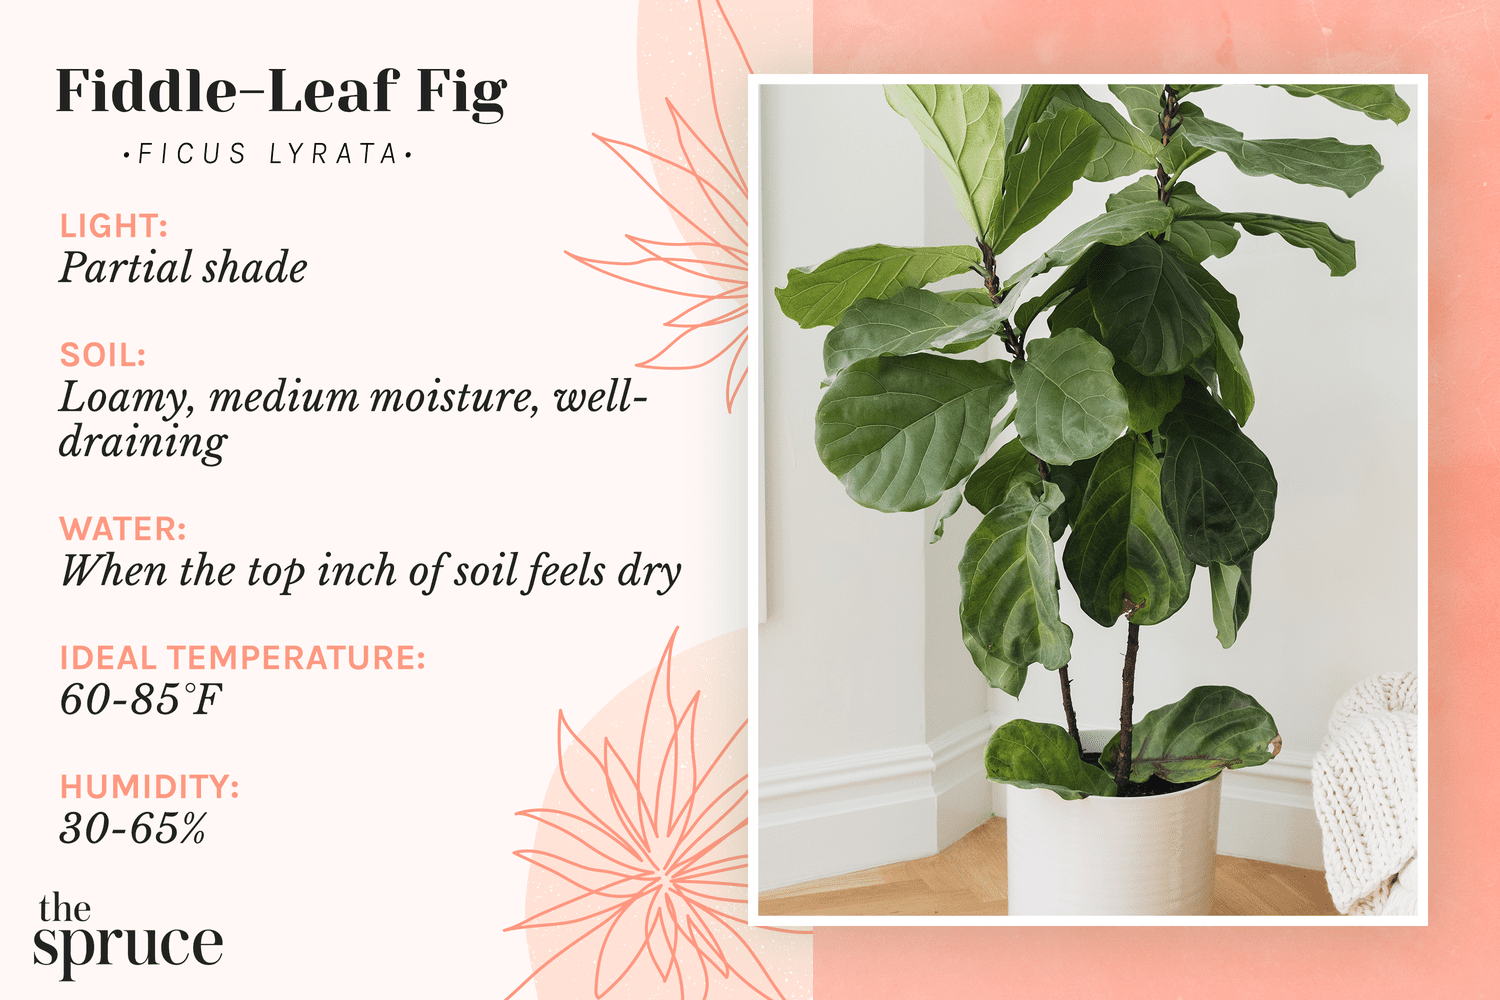 4 Water your repotted fiddle leaf fig